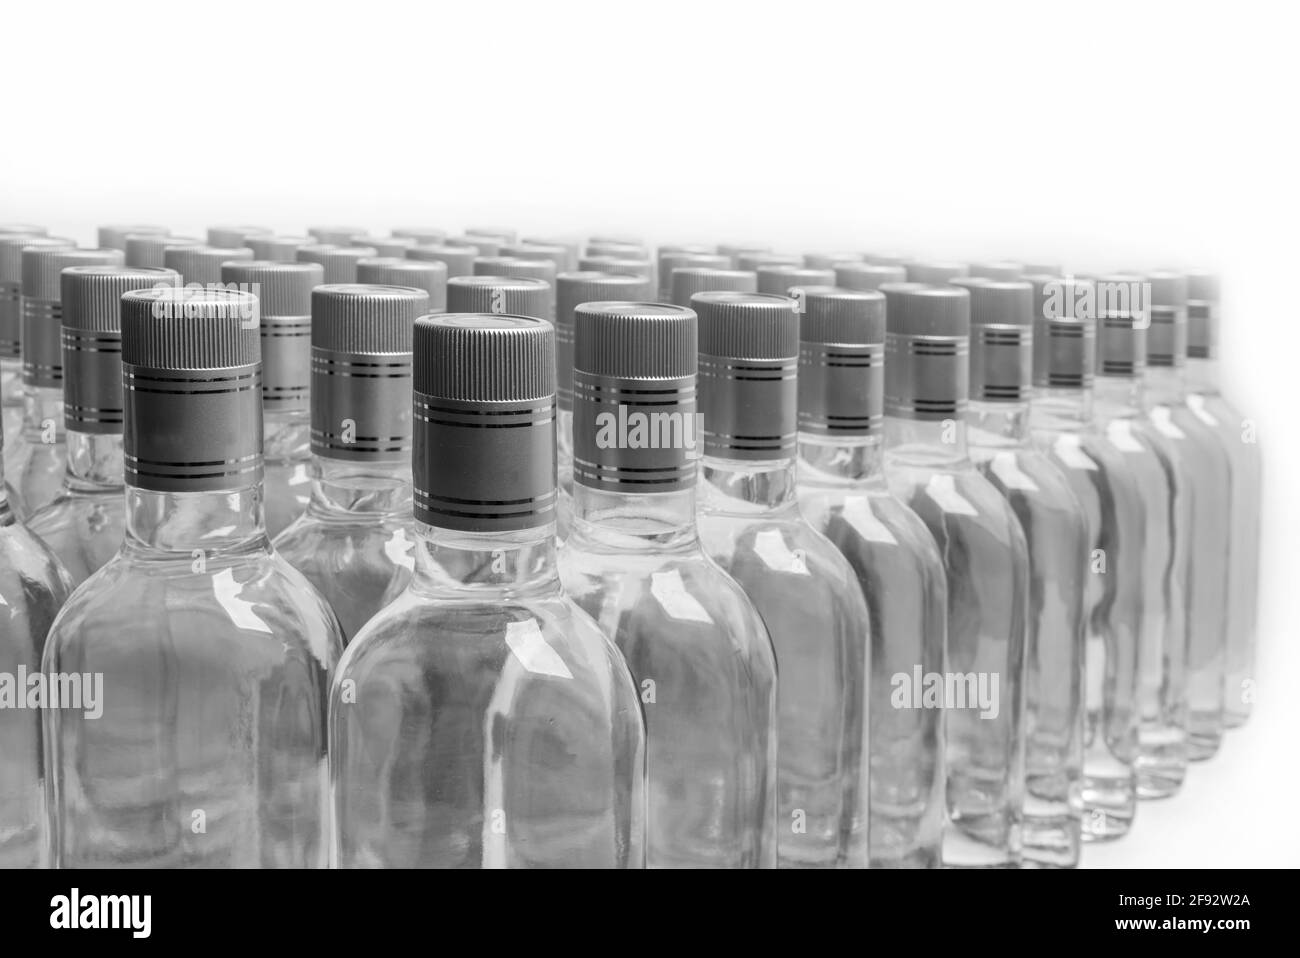 Bottles of pure alcohol not labeled. Multitude Bottles of Home Alcoholic Beverages Isolated On White. Small liquor production based on distillation. B Stock Photo